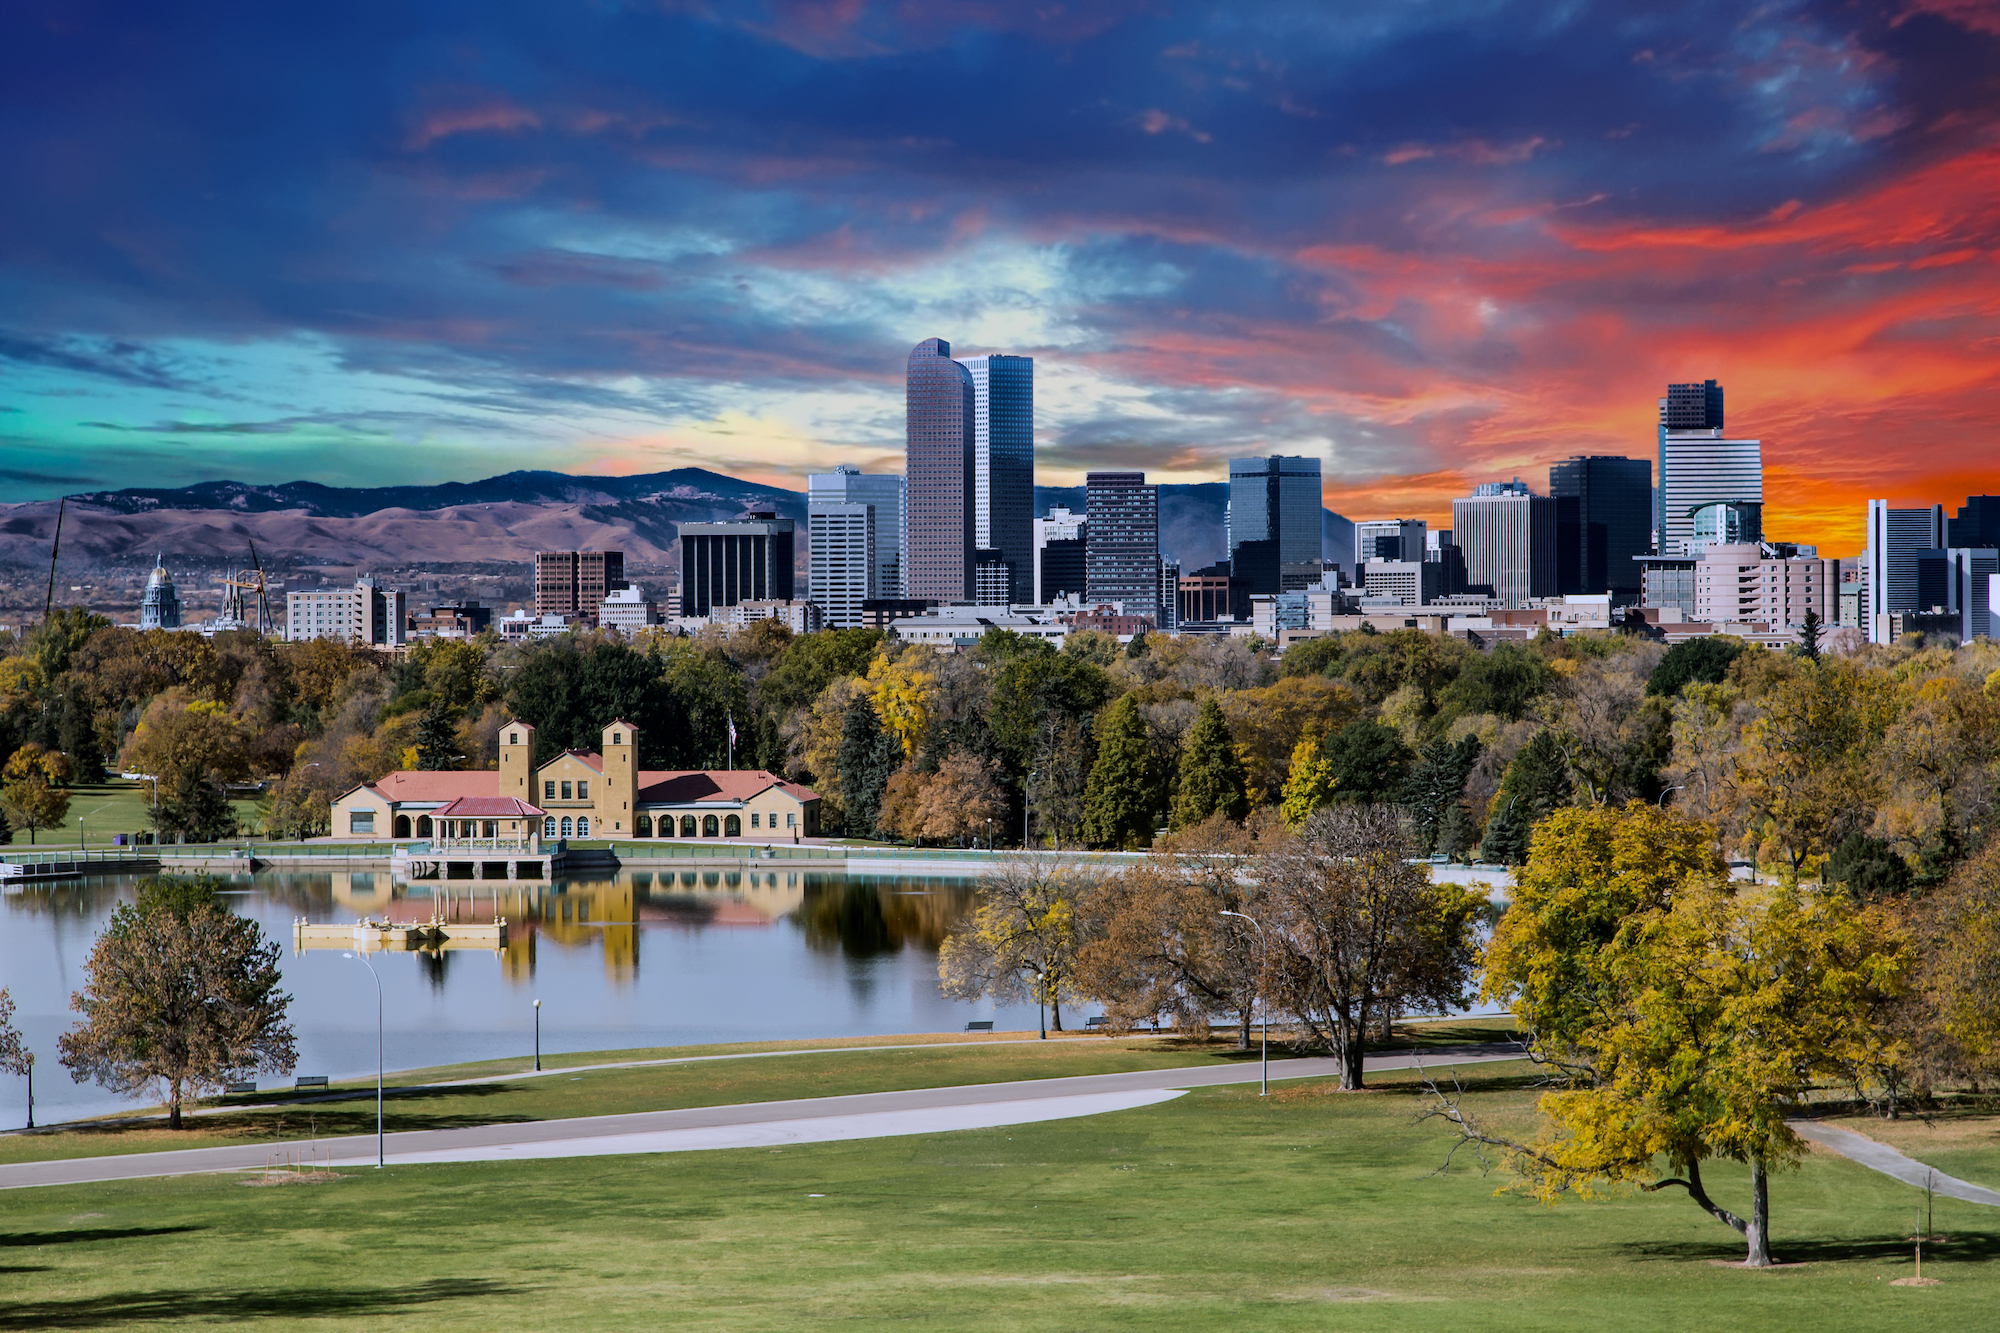 A Colorado city skyline is pictured.